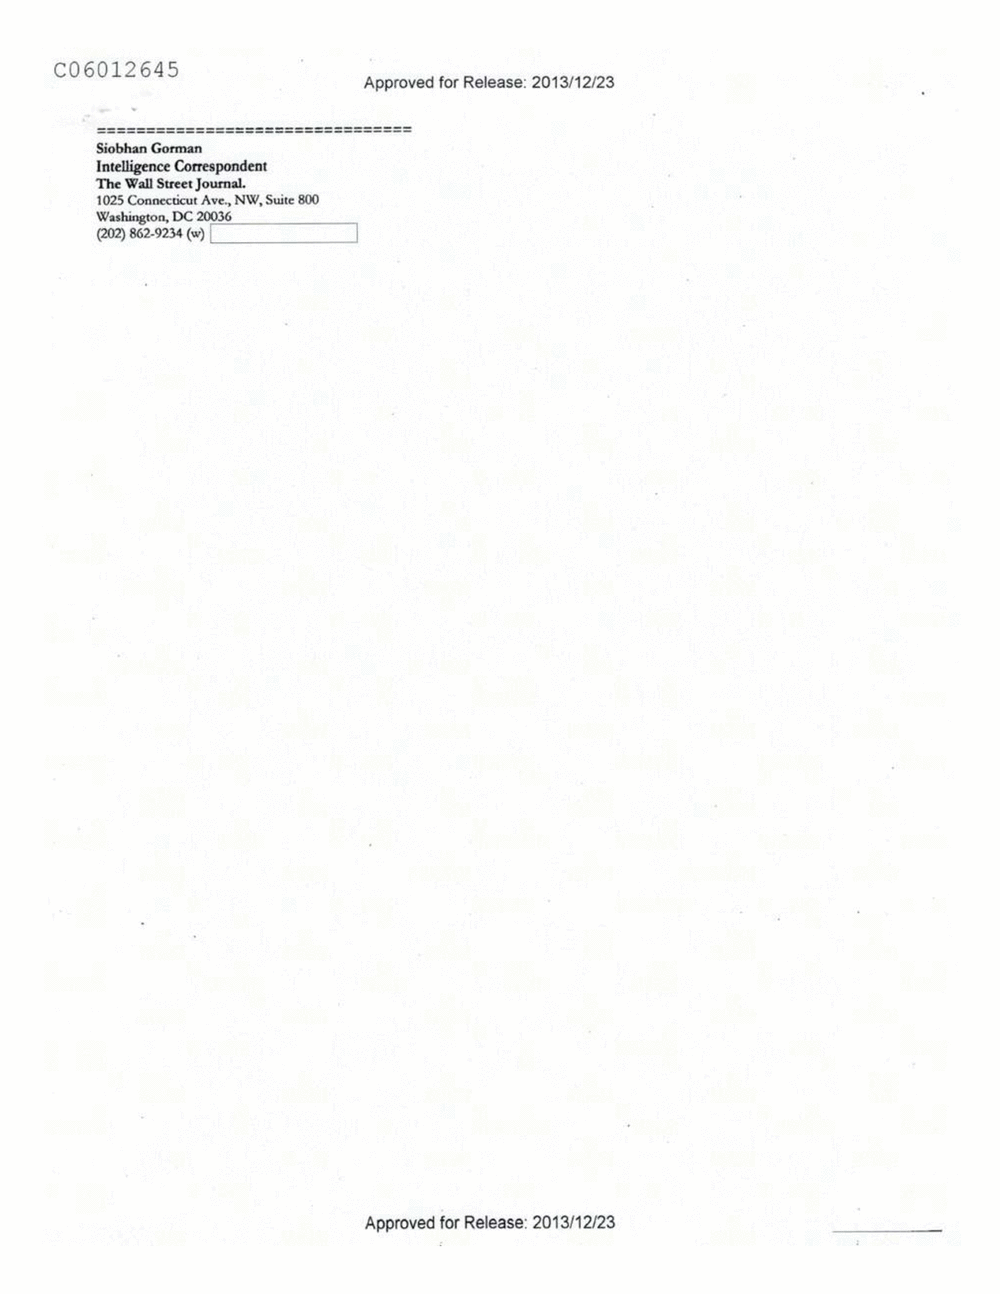 Page 215 from Email Correspondence Between Reporters and CIA Flacks